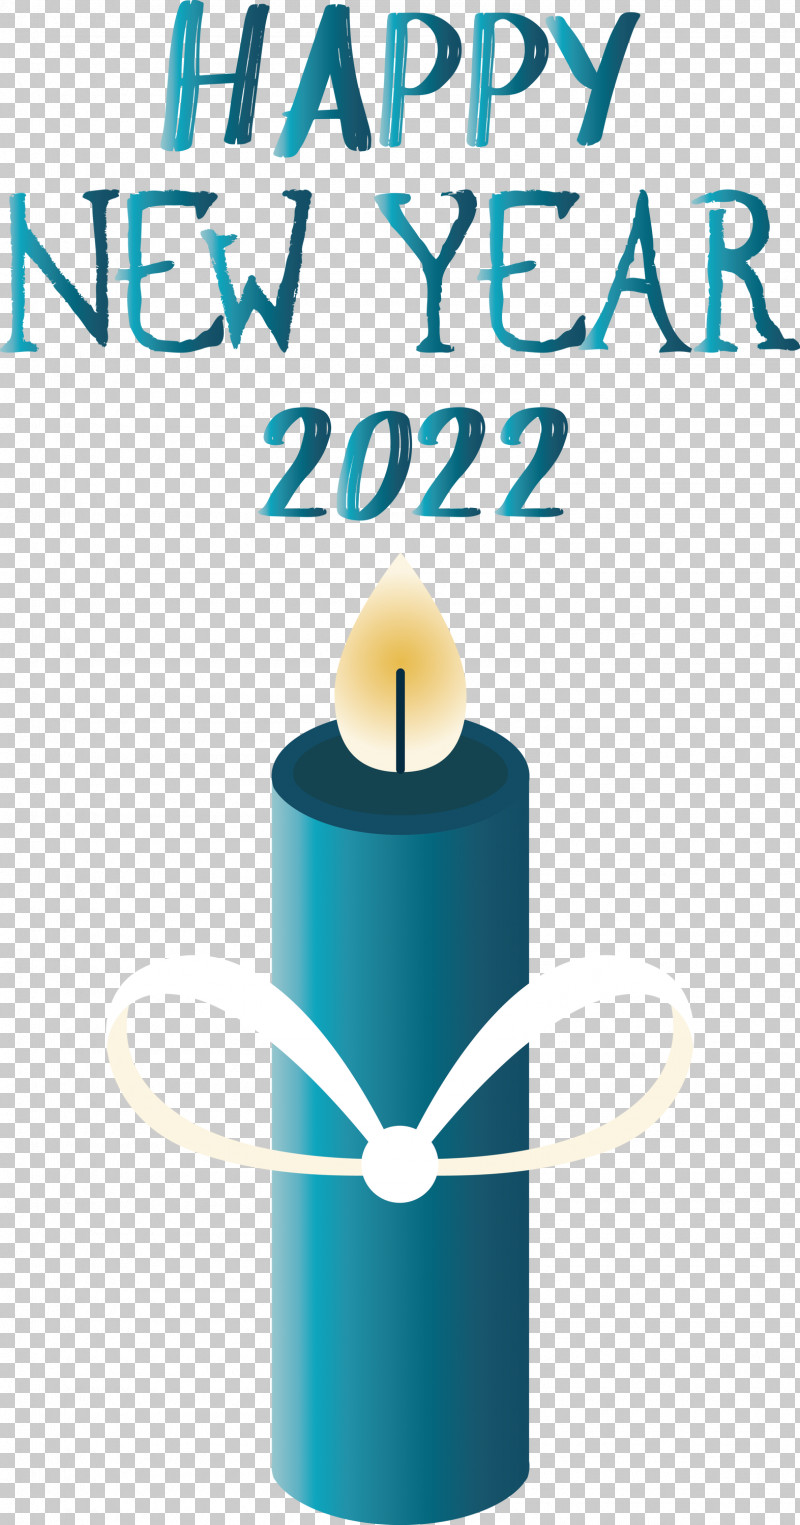 Happy New Year 2022 2022 New Year 2022 PNG, Clipart, Logo, Meter, Teal Free PNG Download